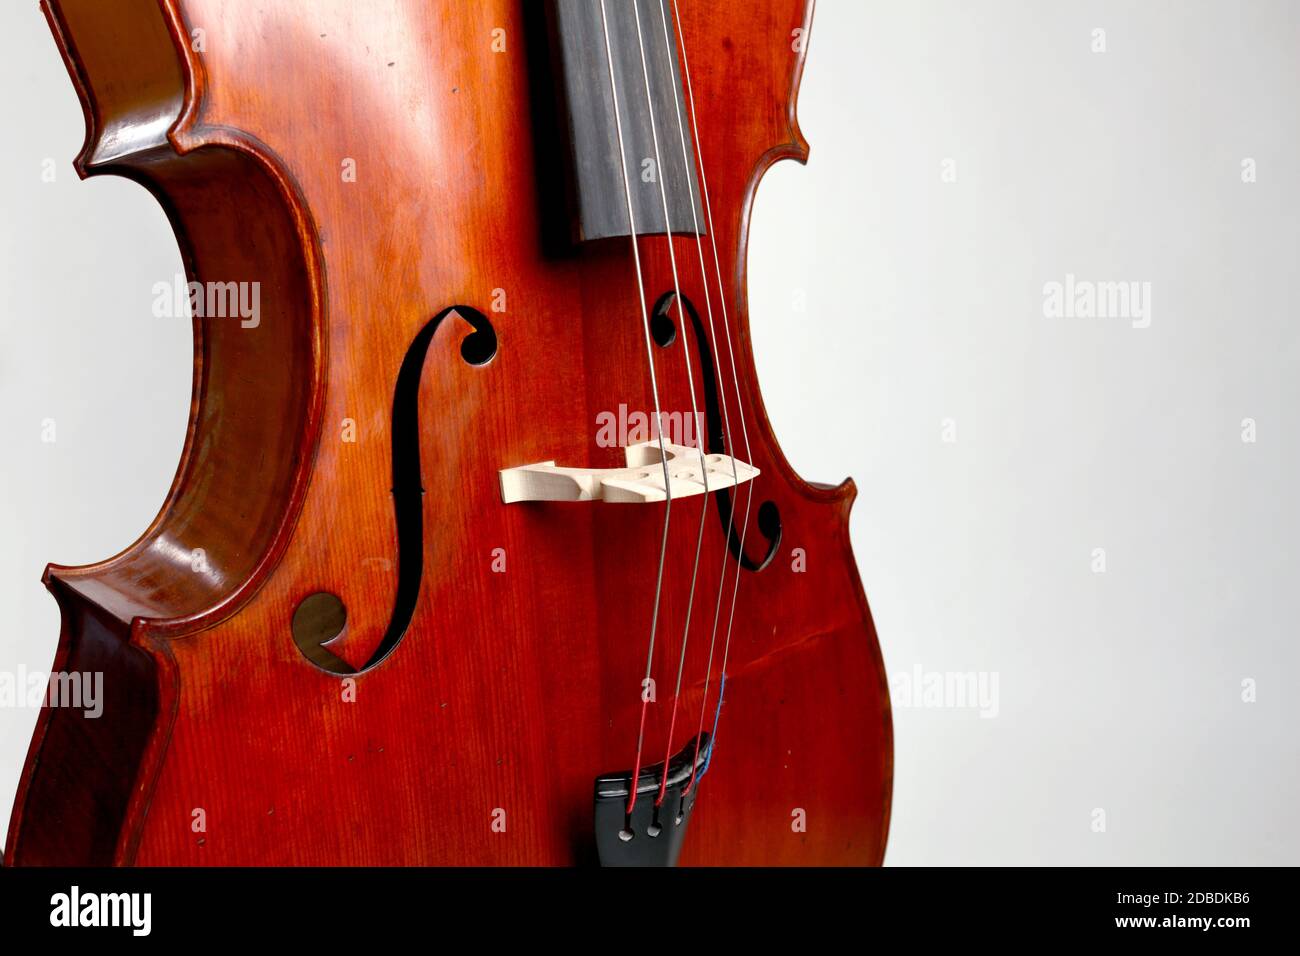 Old double bass c bout and belly on white background Stock Photo